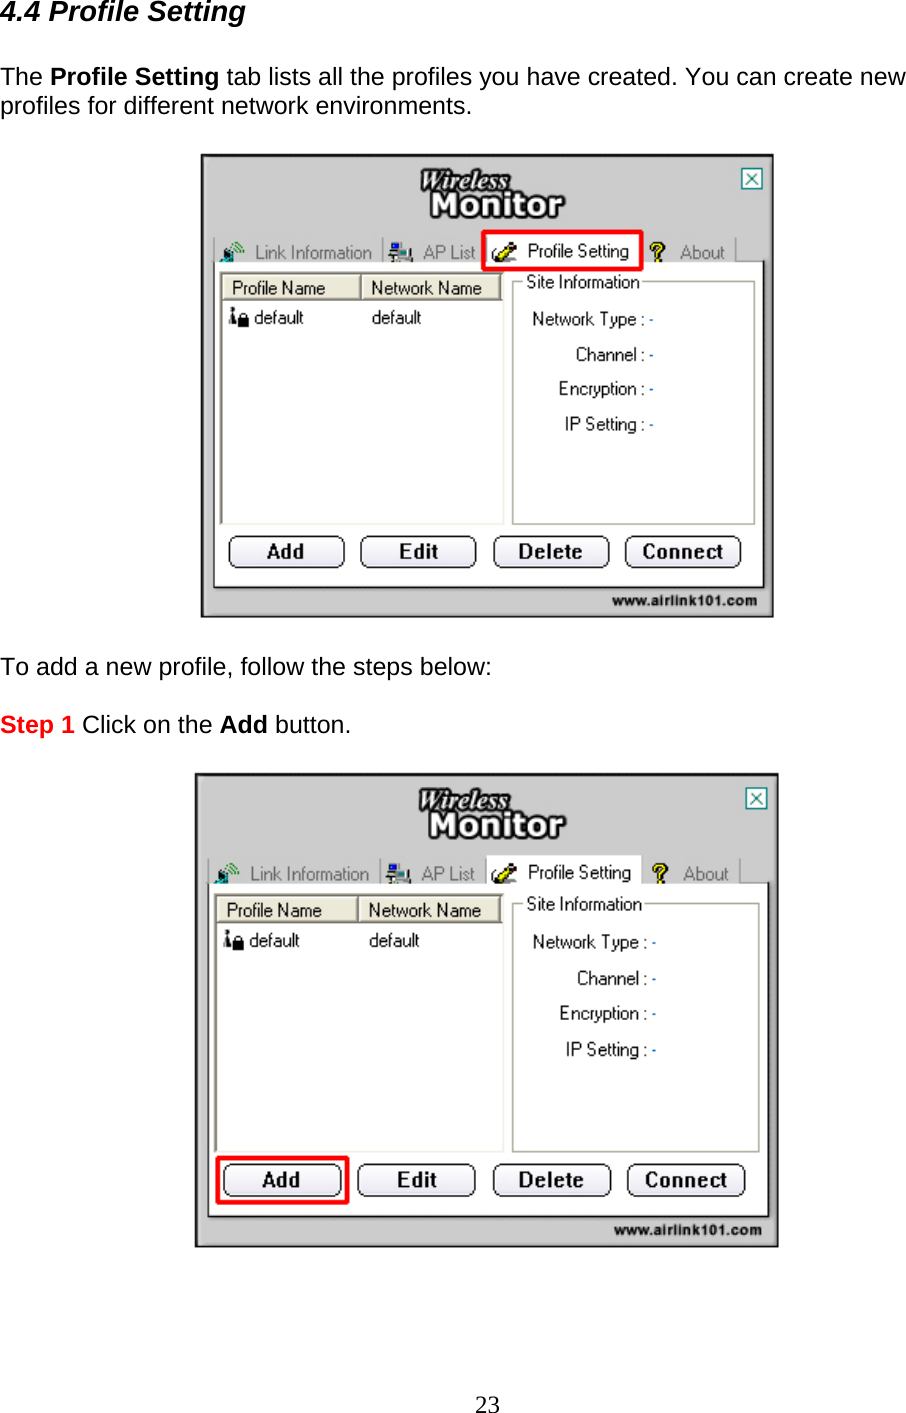 4.4 Profile Setting  The Profile Setting tab lists all the profiles you have created. You can create new profiles for different network environments.    To add a new profile, follow the steps below:  Step 1 Click on the Add button.      23 